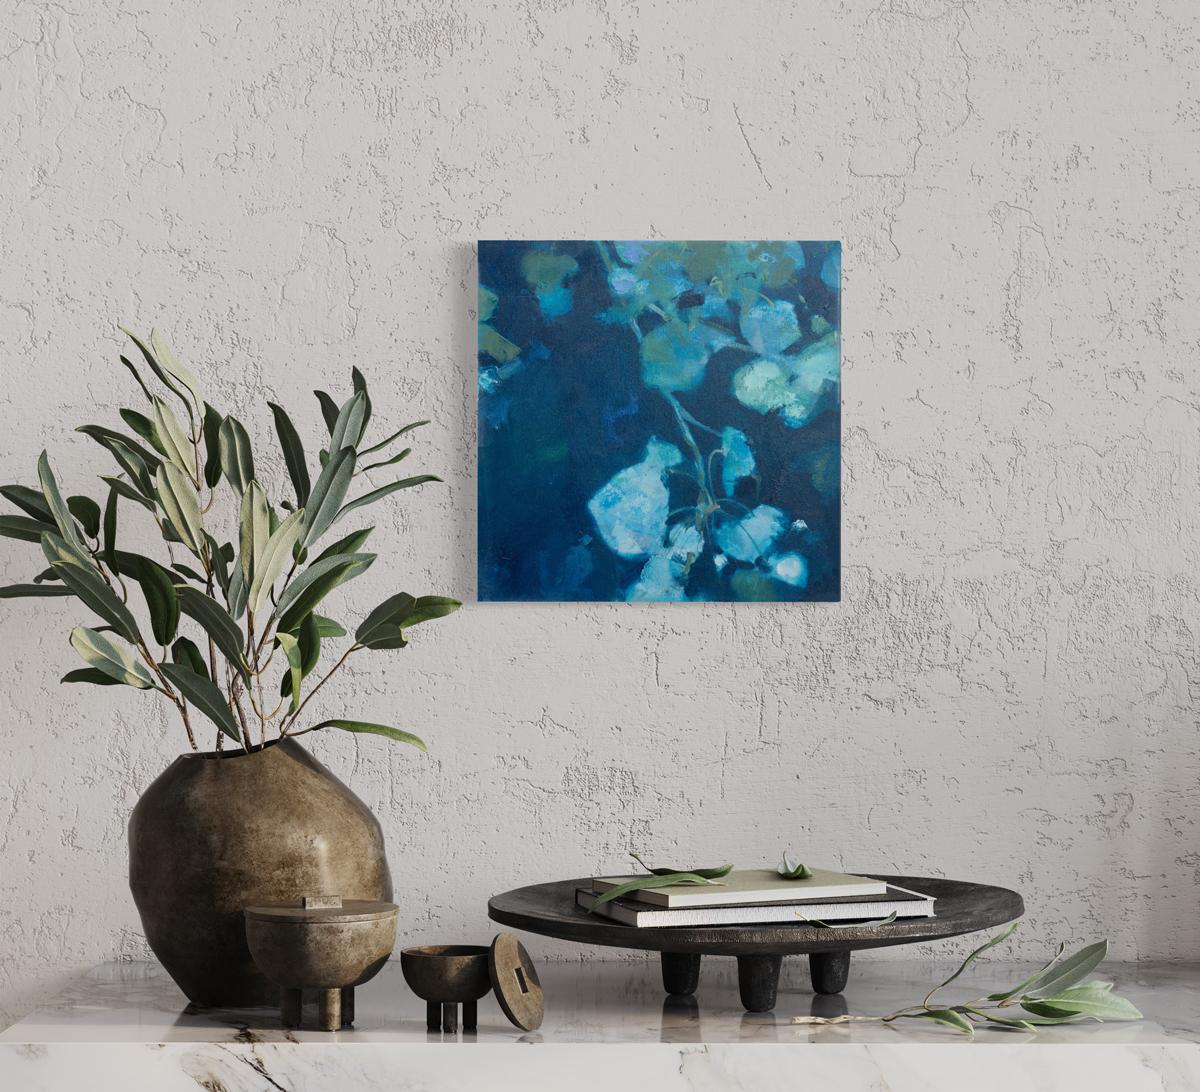 This small abstract floral painting by Kay Flierl is made with oil on canvas and features a cool blue palette. Light blue and earthy green abstracted botanical shapes fan out over a deep blue background. The painting has clean, painted sides, it is